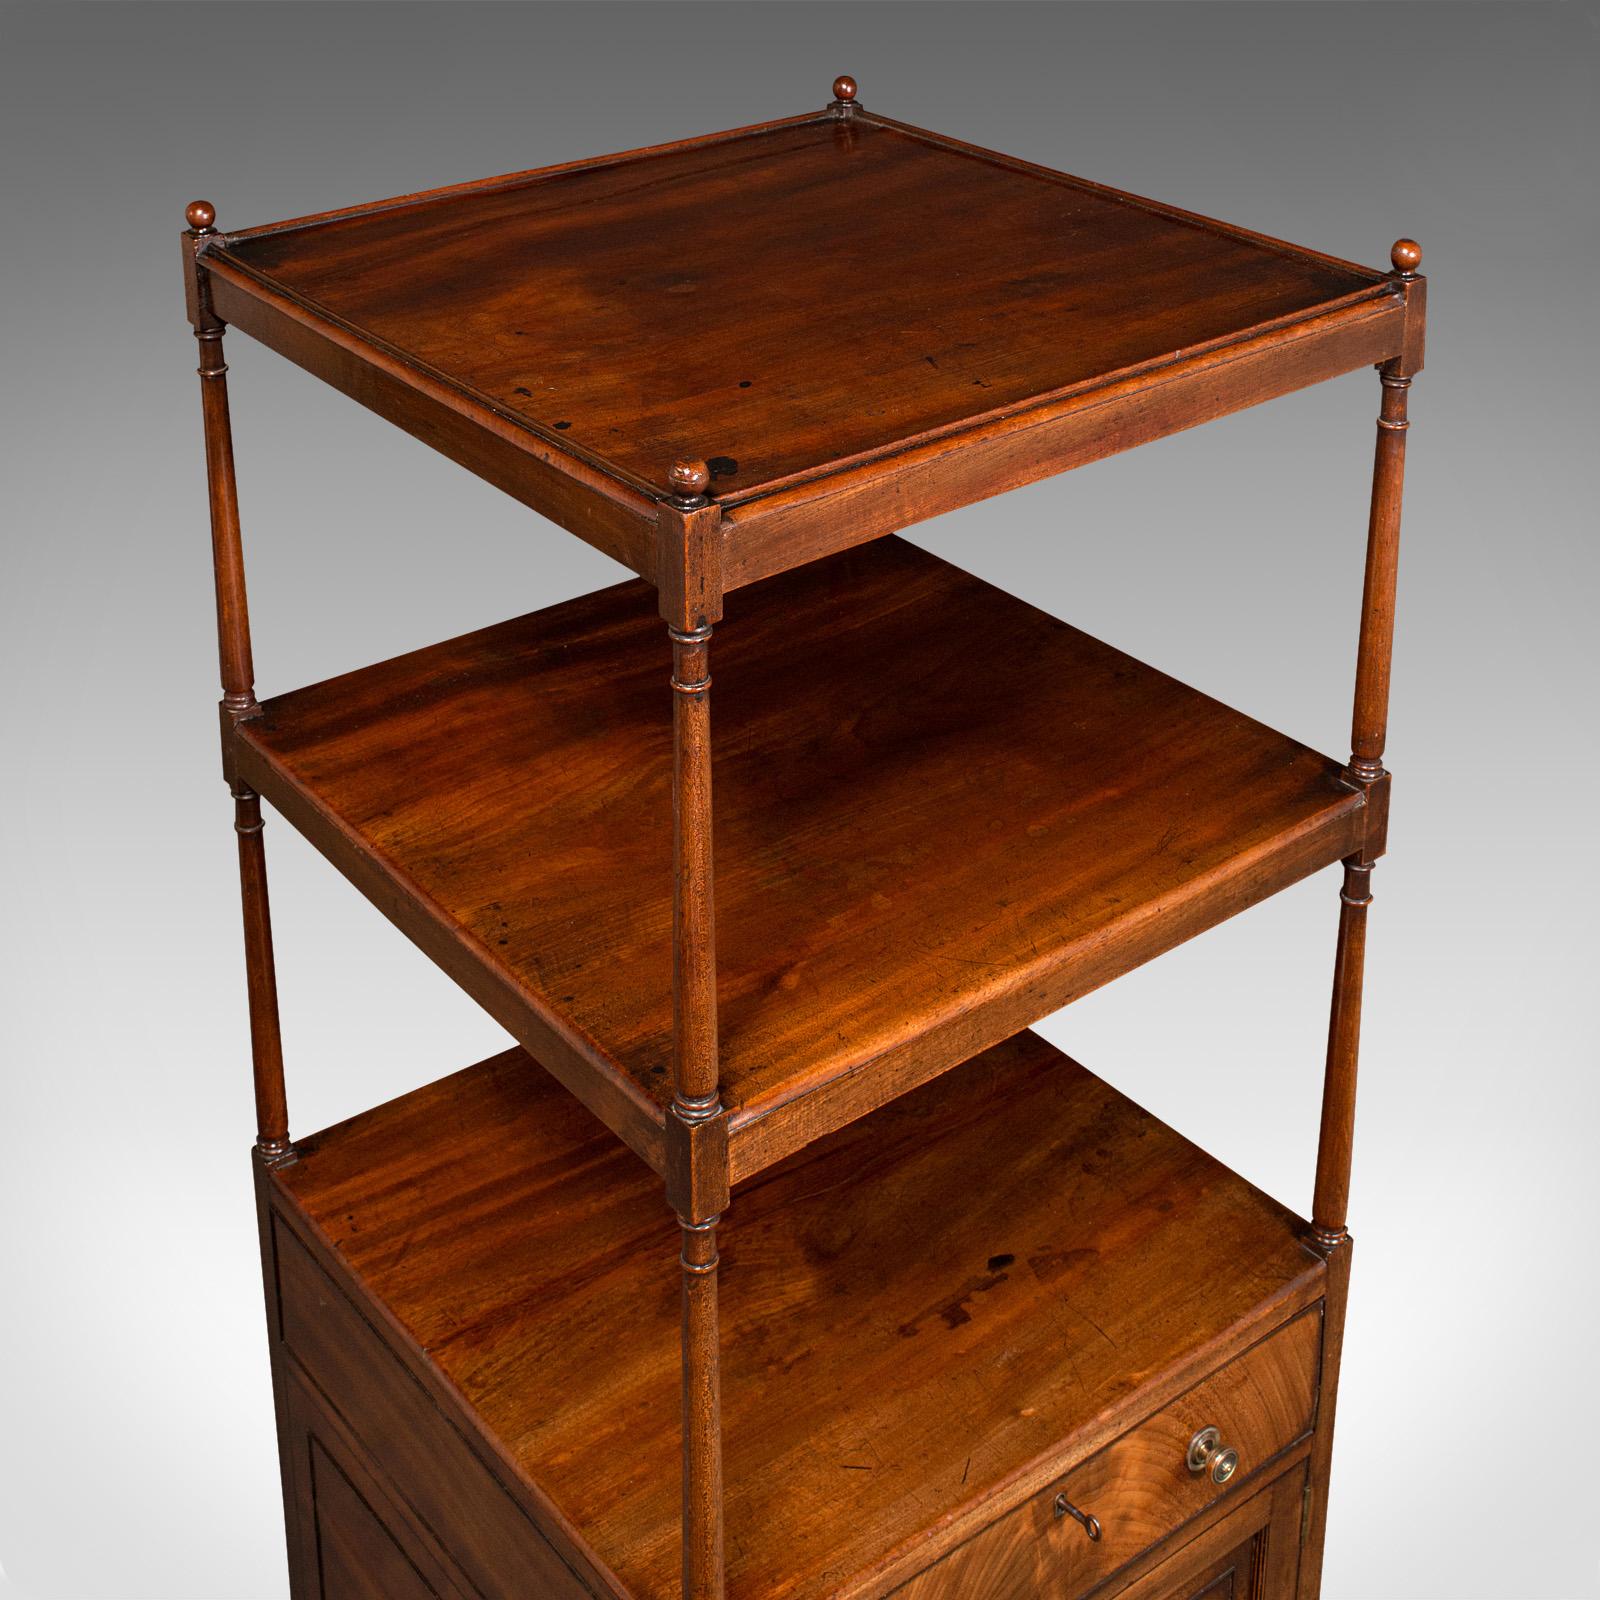 19th Century Antique Two Tier Display Stand, English, Whatnot, Cabinet, Victorian, Circa 1860 For Sale